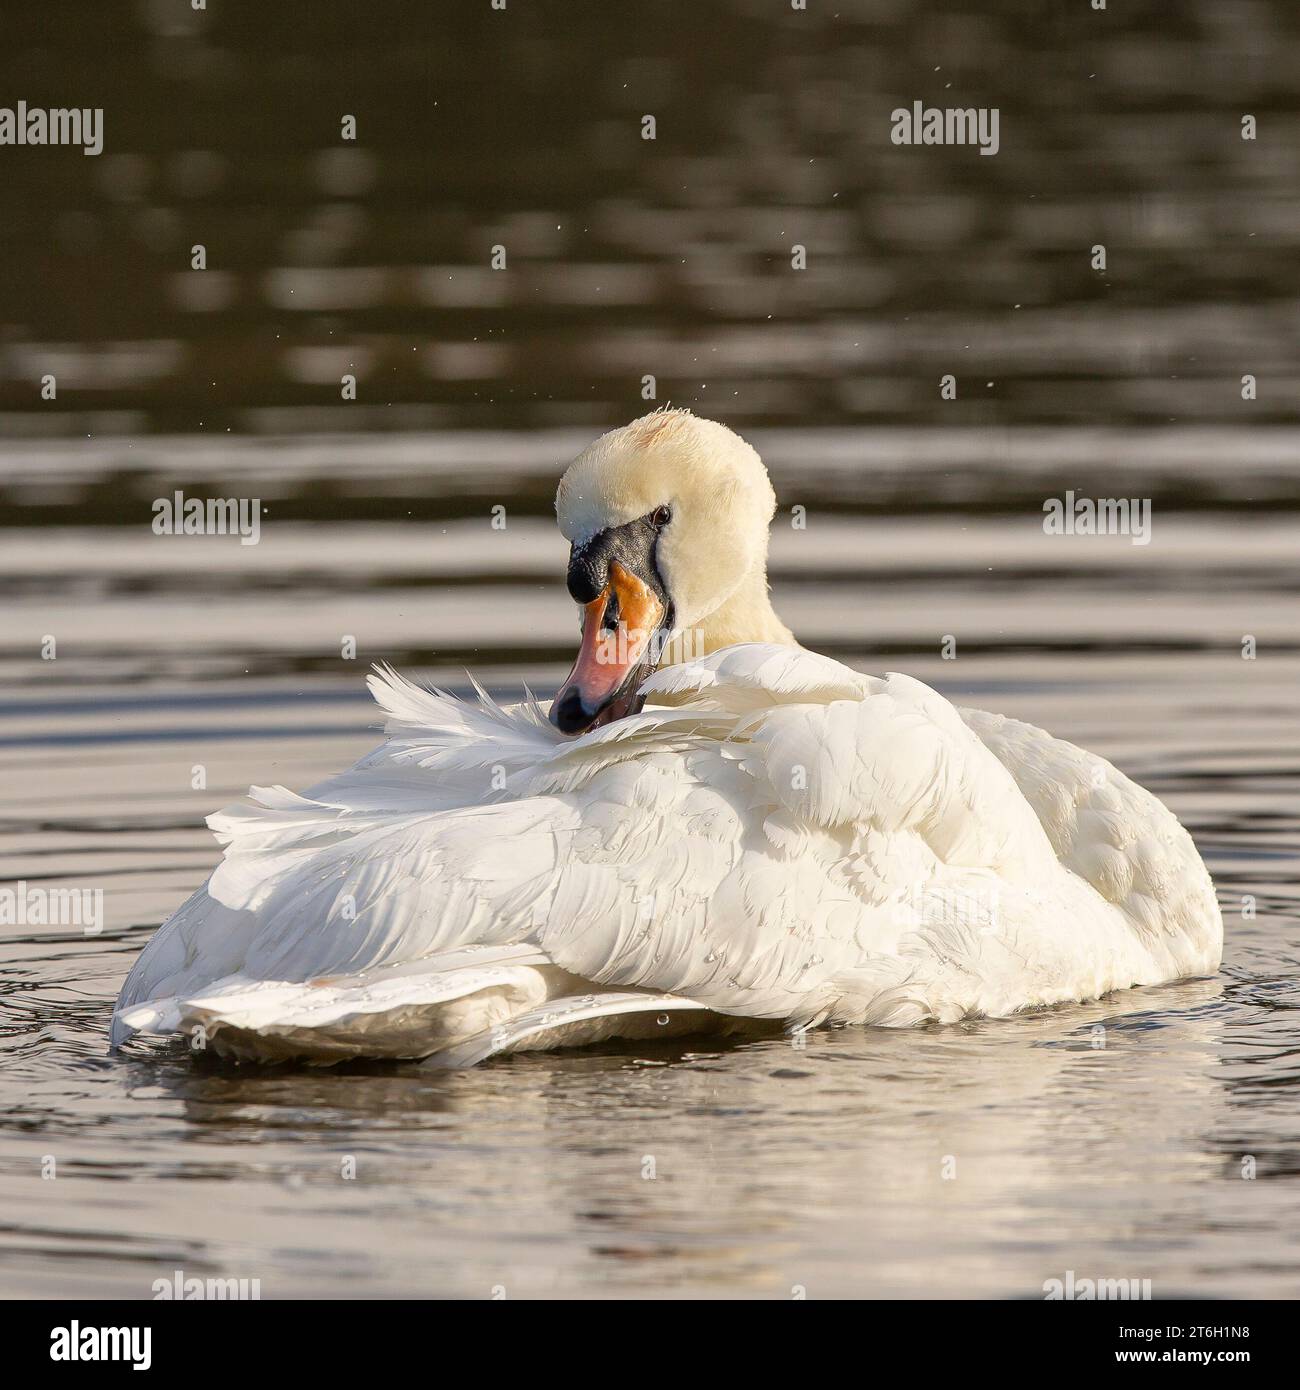 Kidderminster, UK. 10th November, 2023. UK weather: the local wildlife enjoys some much needed sunshine today, quite a contrast to the past wet, gloomy week. The weather continues dry for tomorrow's Armistice Day but turns wet again for Sunday. A lone mute swan preens here in the morning sunshine. Credit: Lee Hudson/Alamy Live News Stock Photo